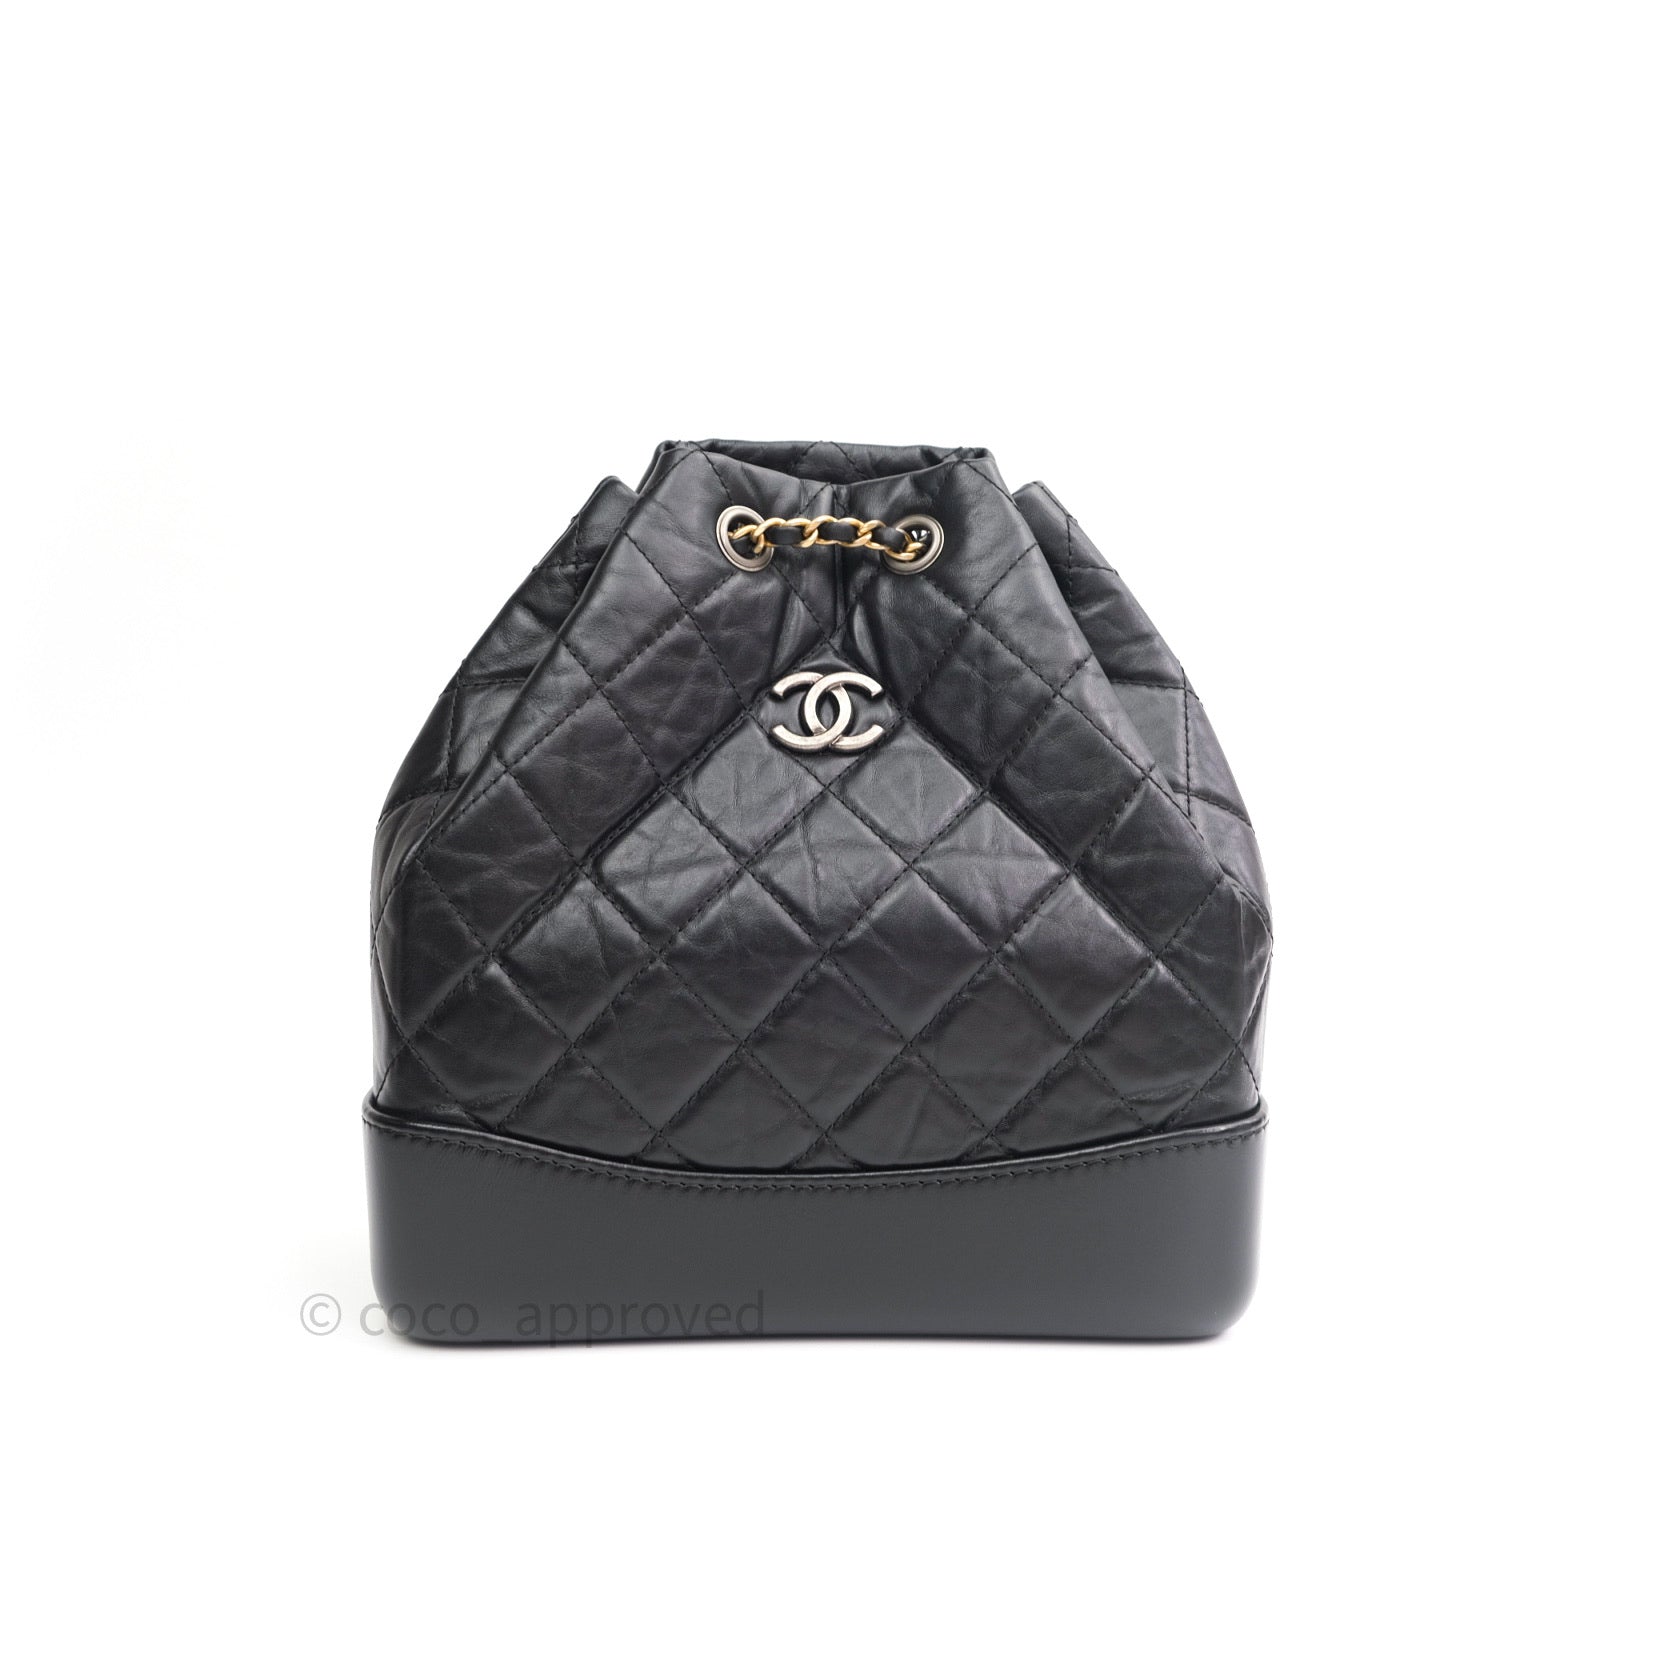 Chanel Black Aged Calfskin Leather Gabrielle Backpack with Mixed